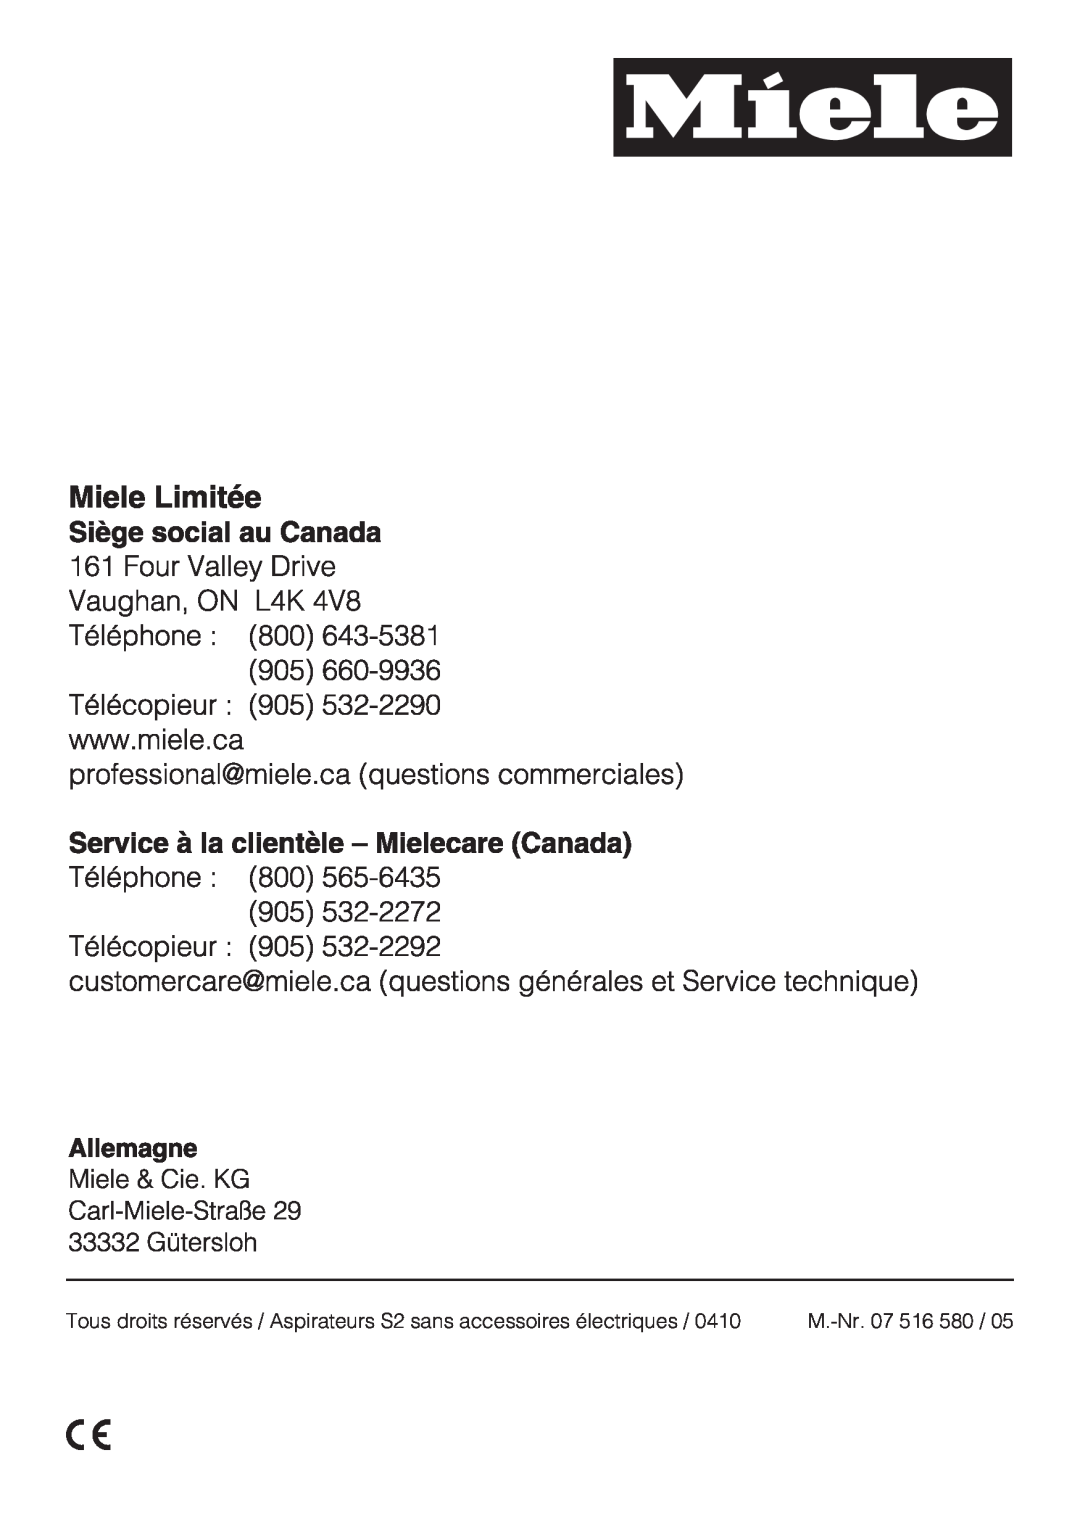 Miele S 2000 operating instructions M.-Nr.07 516 580 